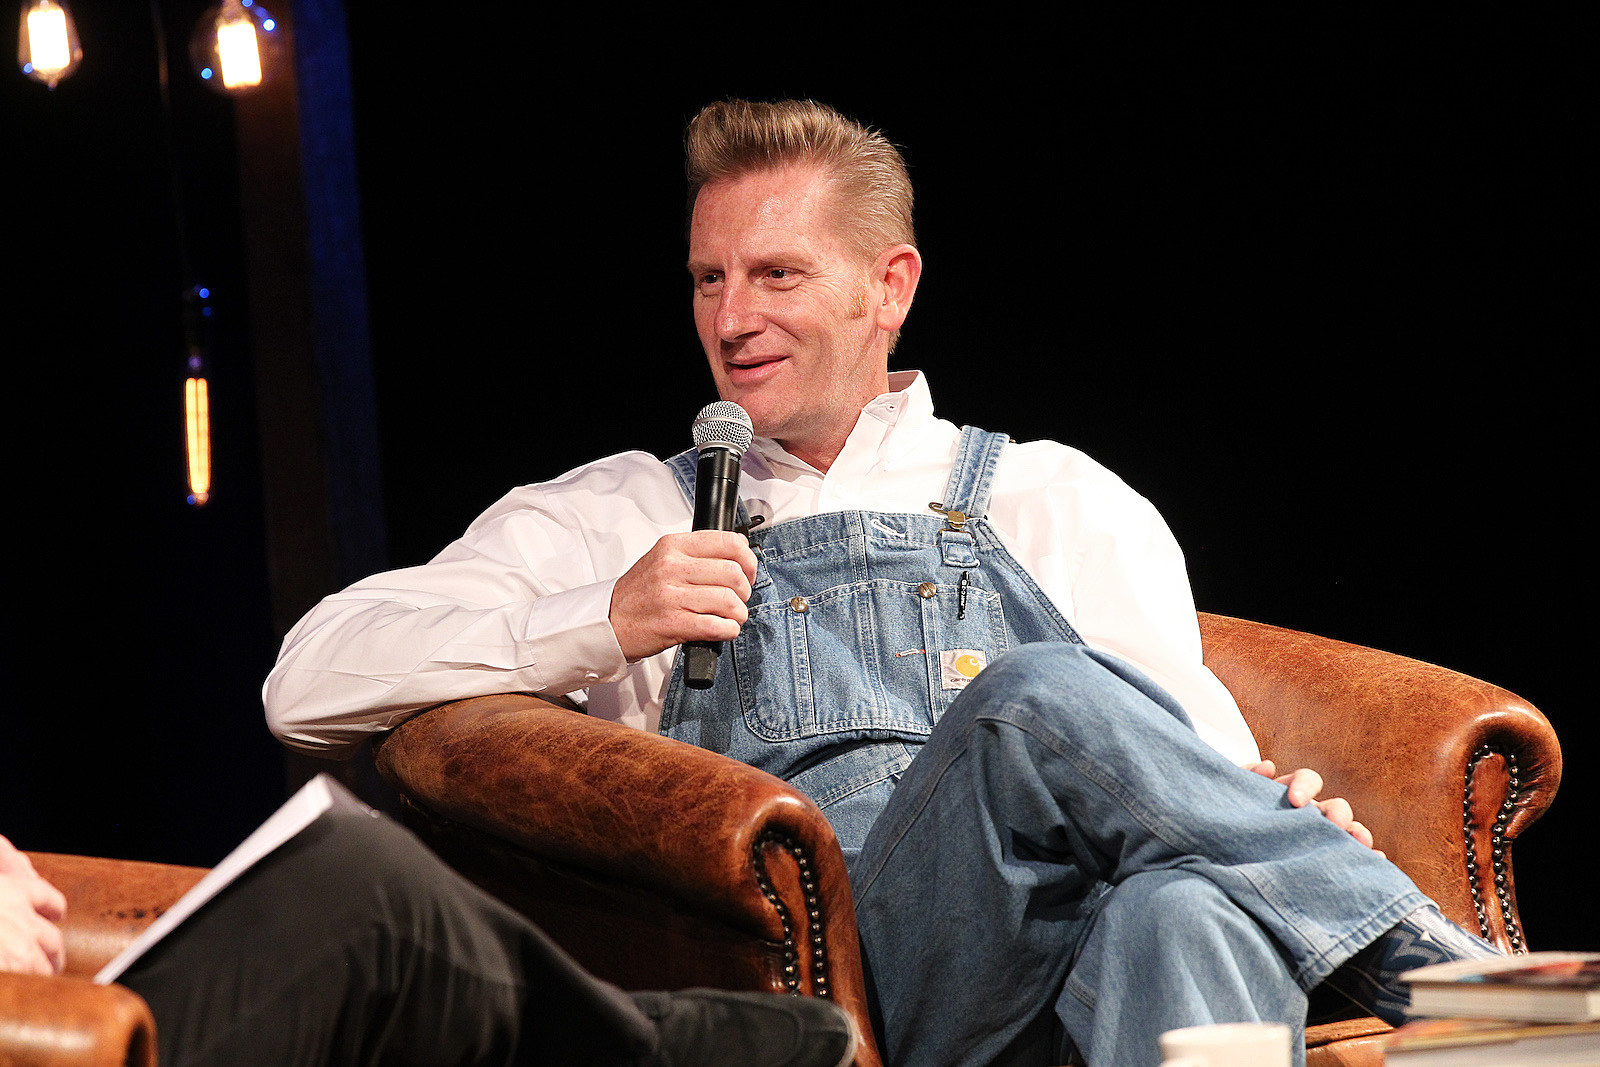 Rory Feek Finds Love Again, Eight Years After Wife Joey's Death